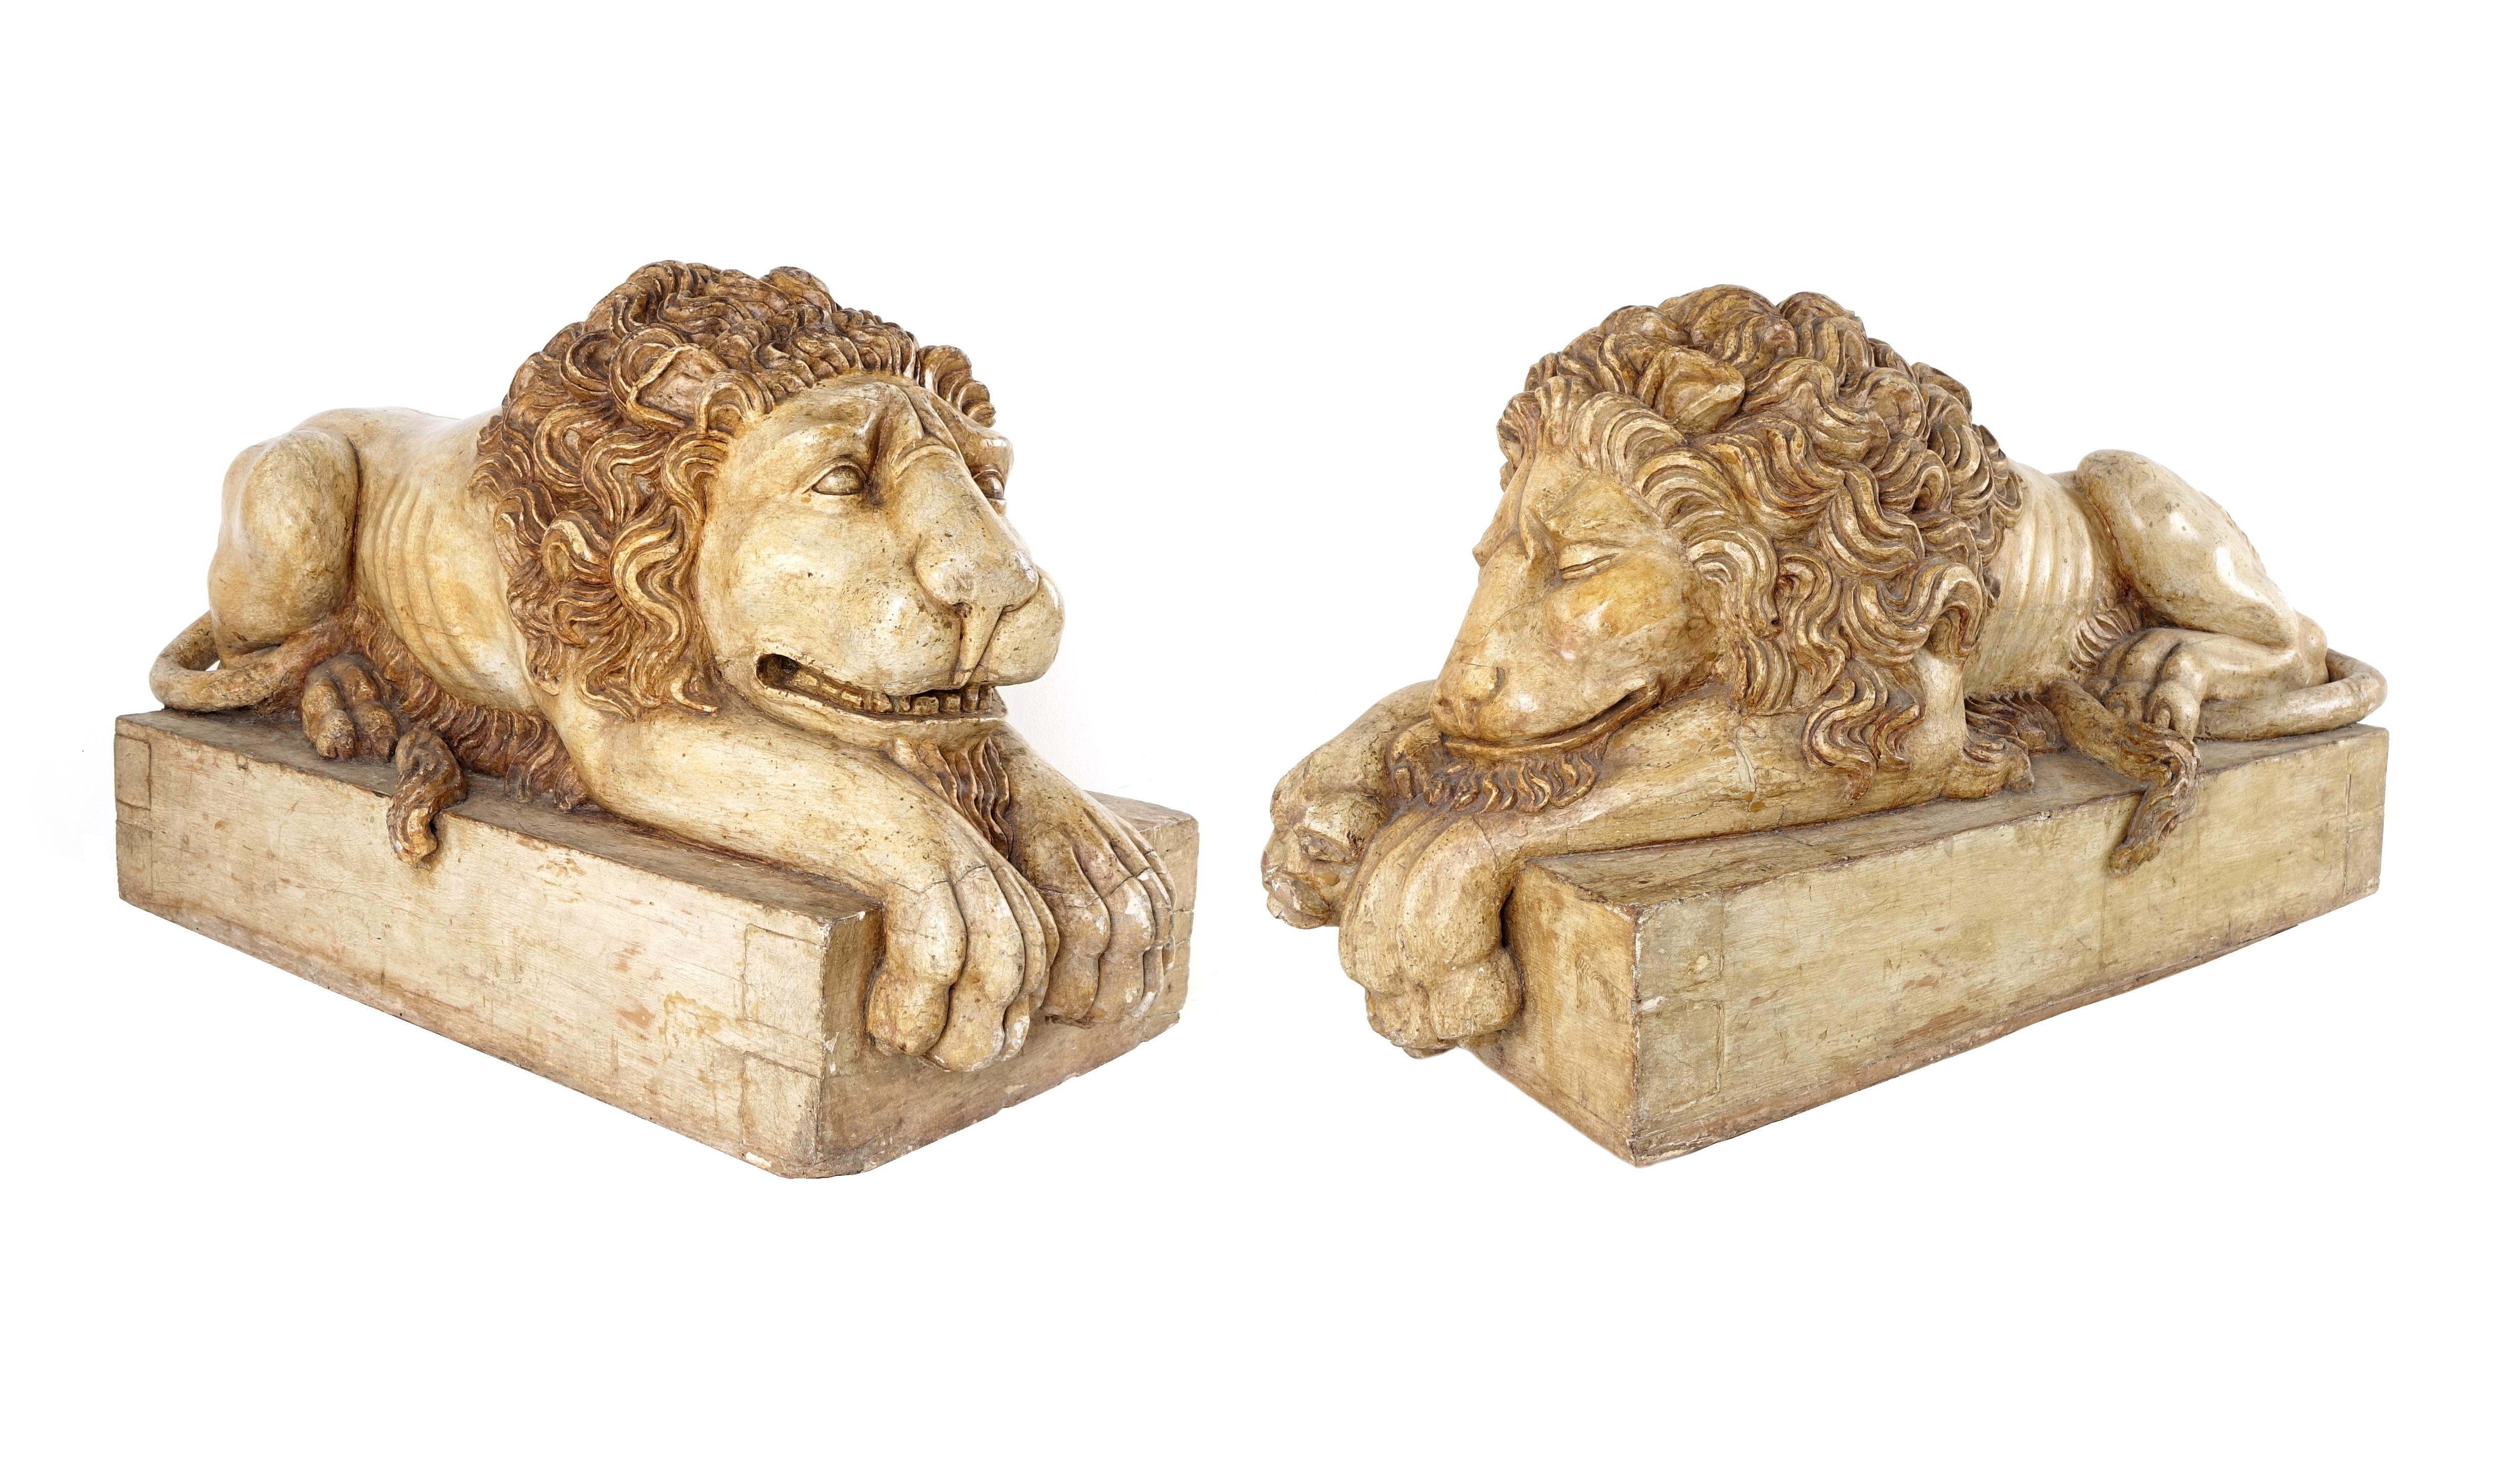 Pair of sculptures depicting sleeping lions.
The model is an invention of Canova.
Legend says that in 1767 Canova at the age of 10 made a lion with butter for a cake, it was a winged lion that had a great success.
It happened during a dinner